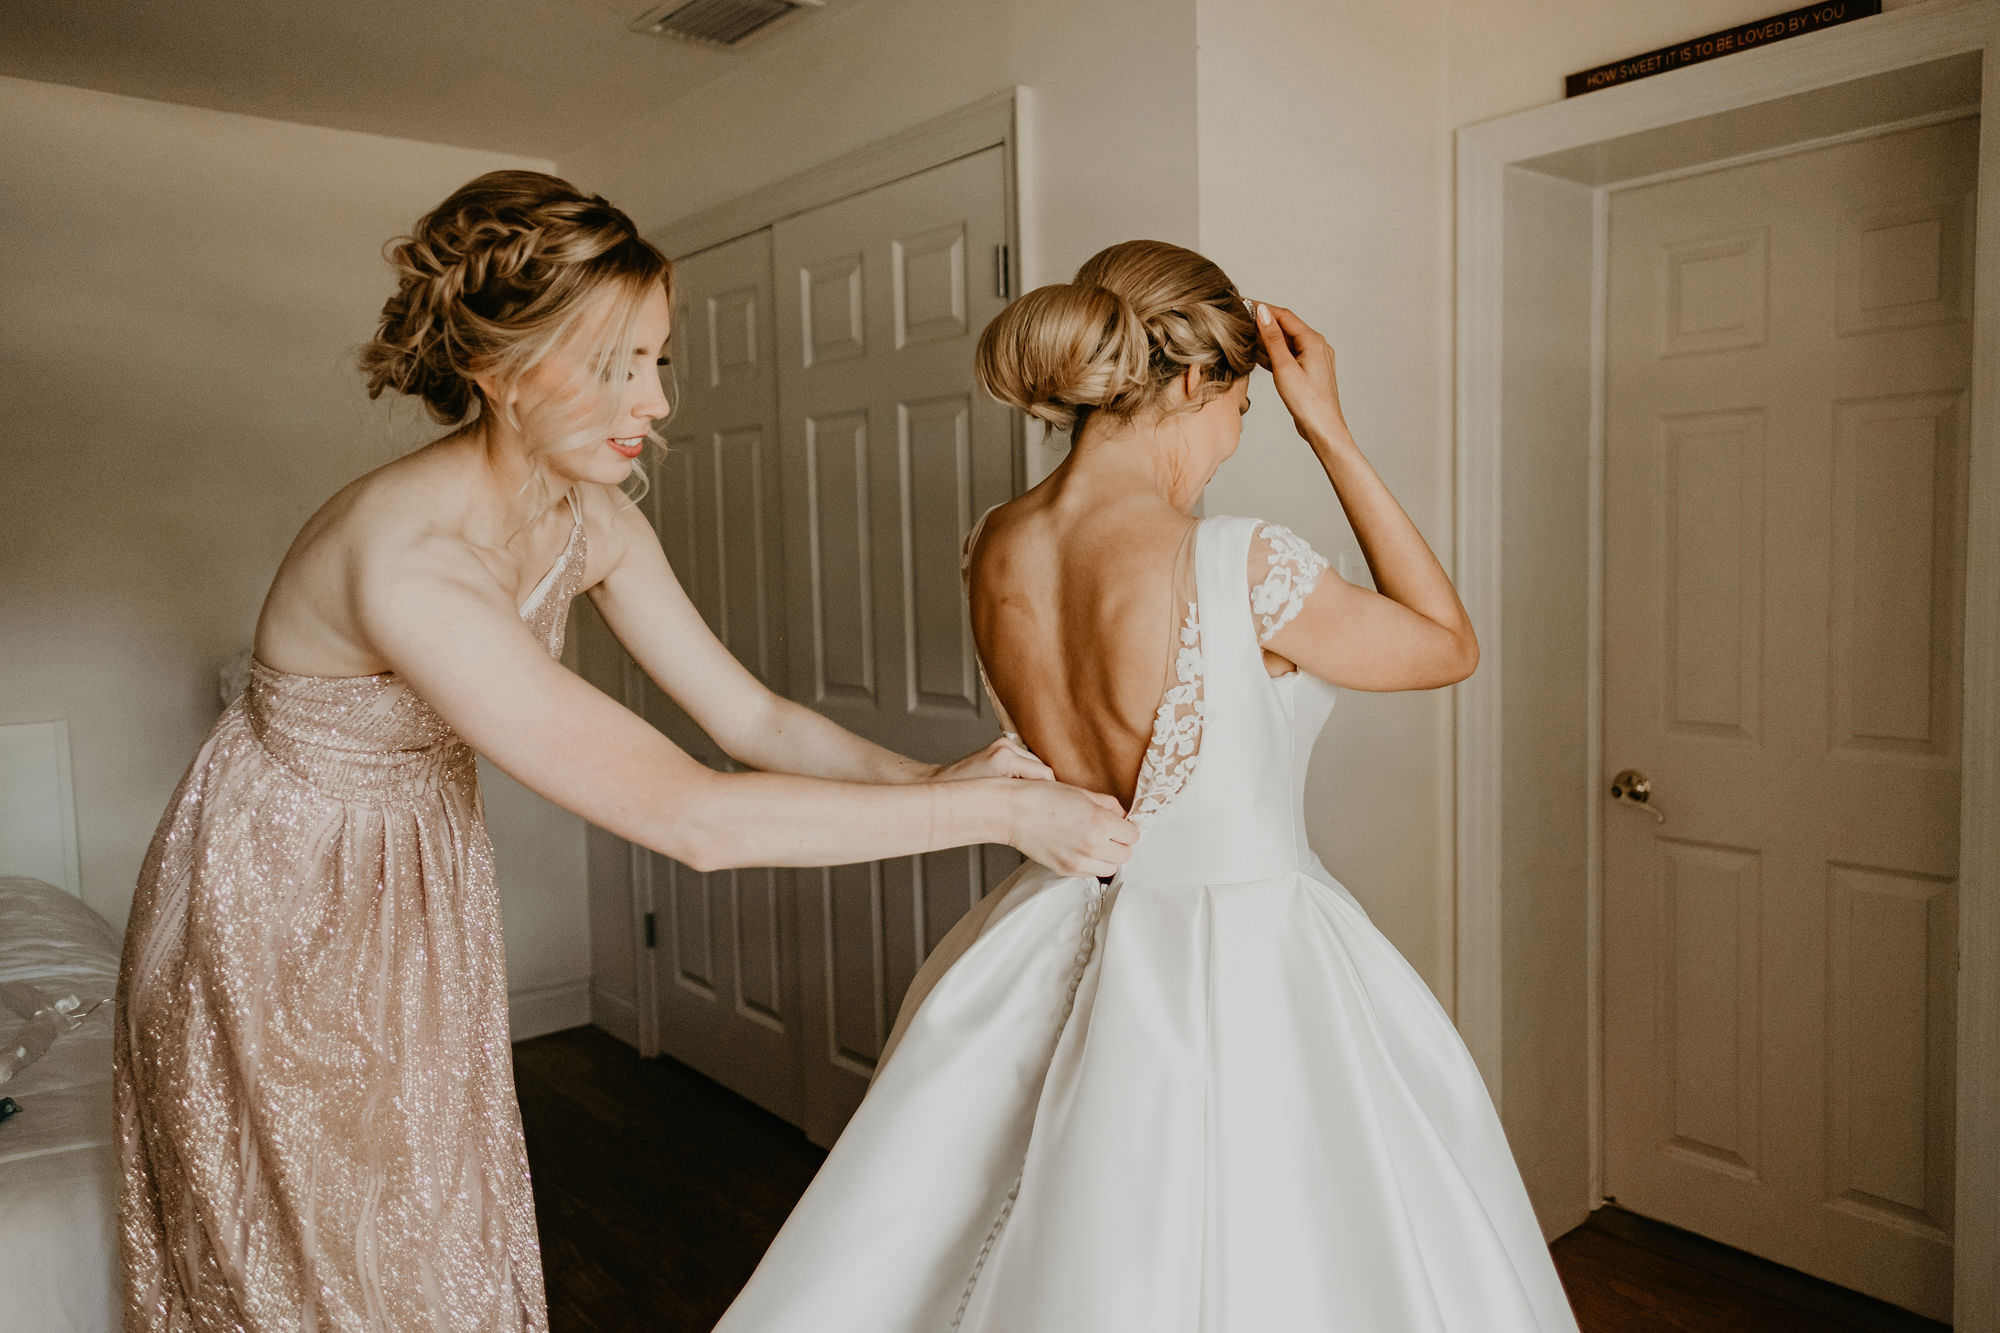 Bride Getting Dressed and Ready | Low Back Ballgown Wedding Dress | Champagne Blush Nude Pink Sequin One Shoulder Bridesmaid Dress